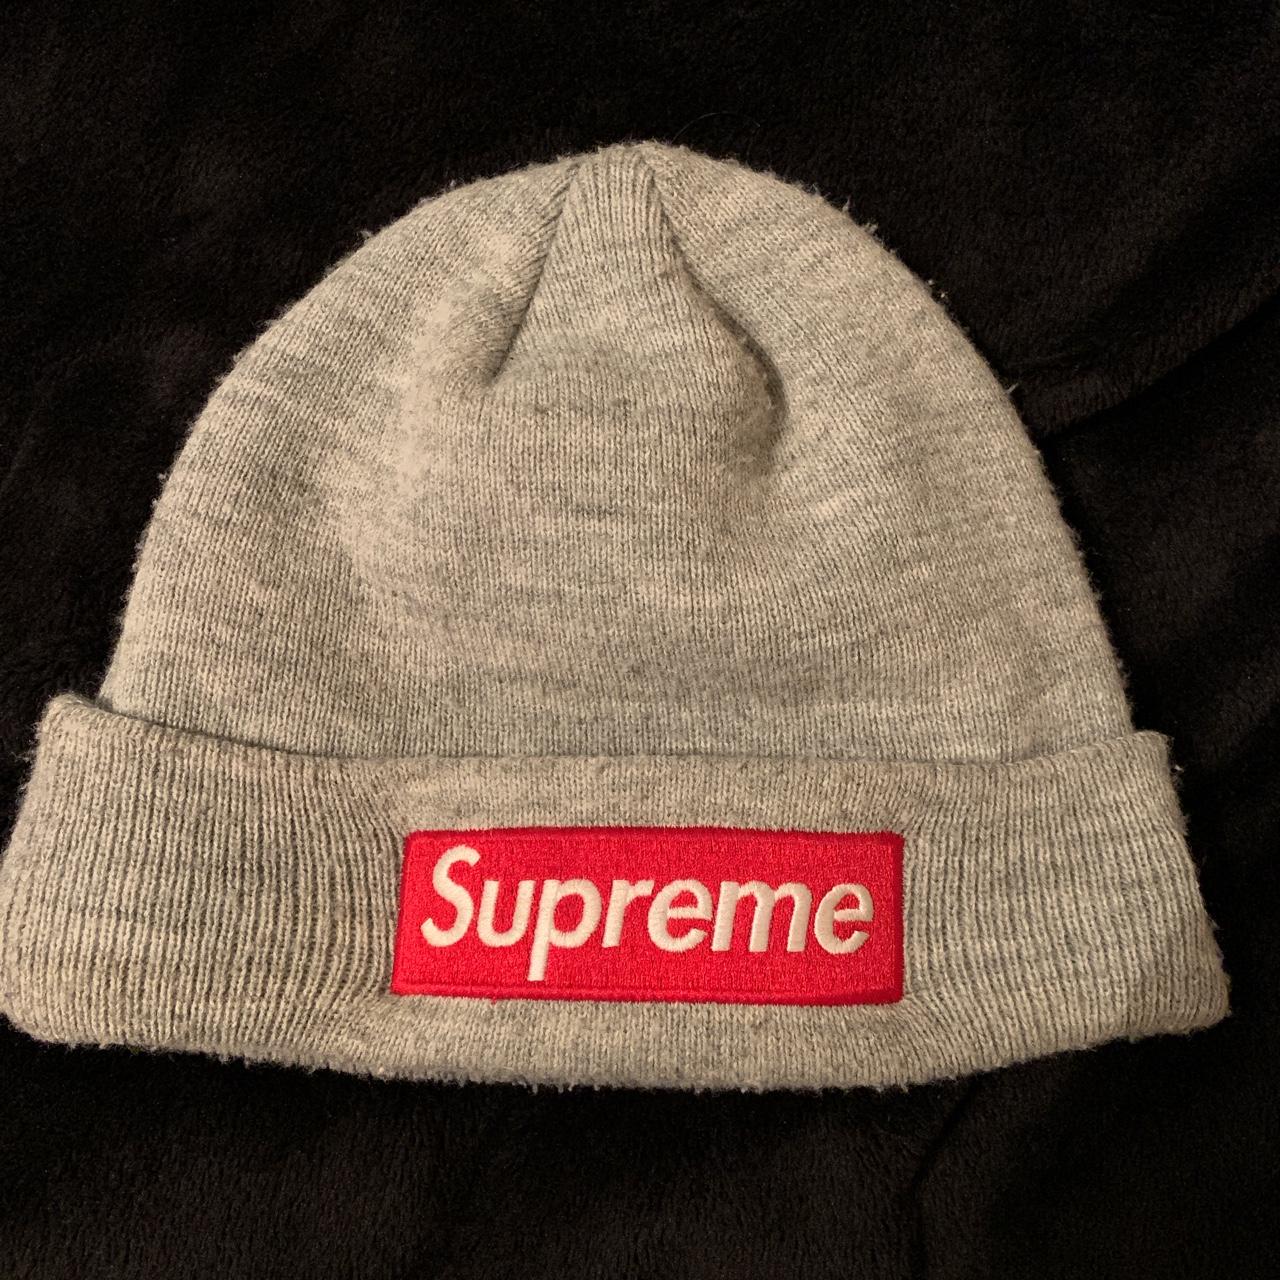 Supreme Box Logo Beanie in grey This item is in good... - Depop